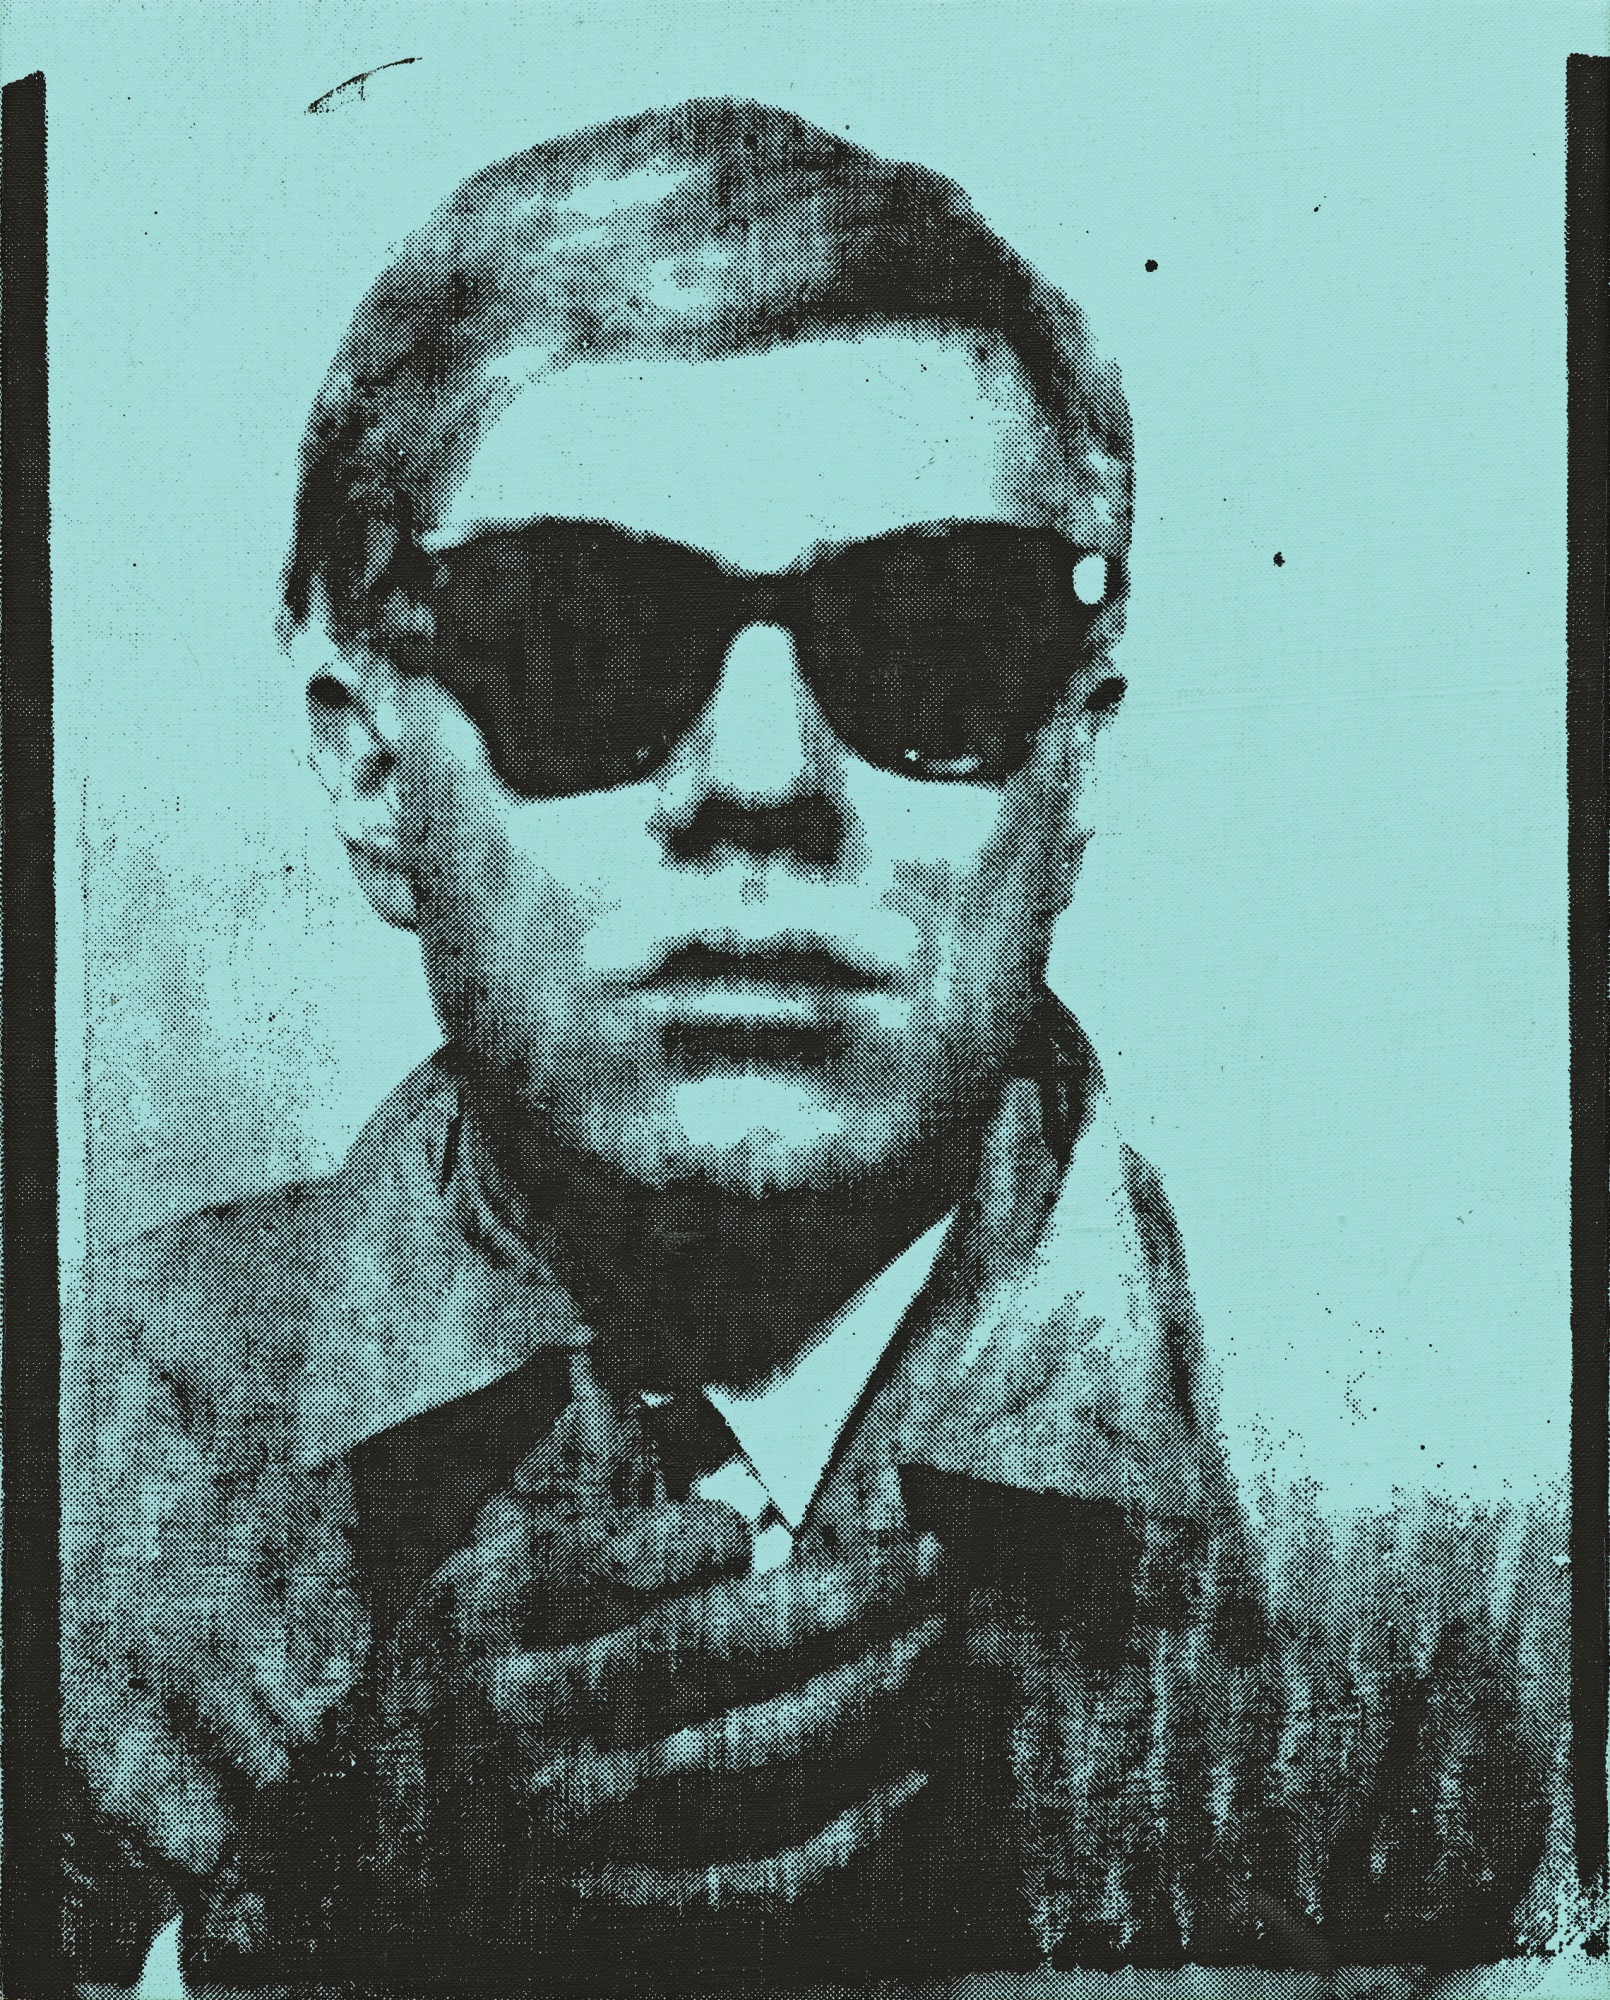 Self Portrait (1963) by Andy Warhol. Image courtesy of Sotheby's